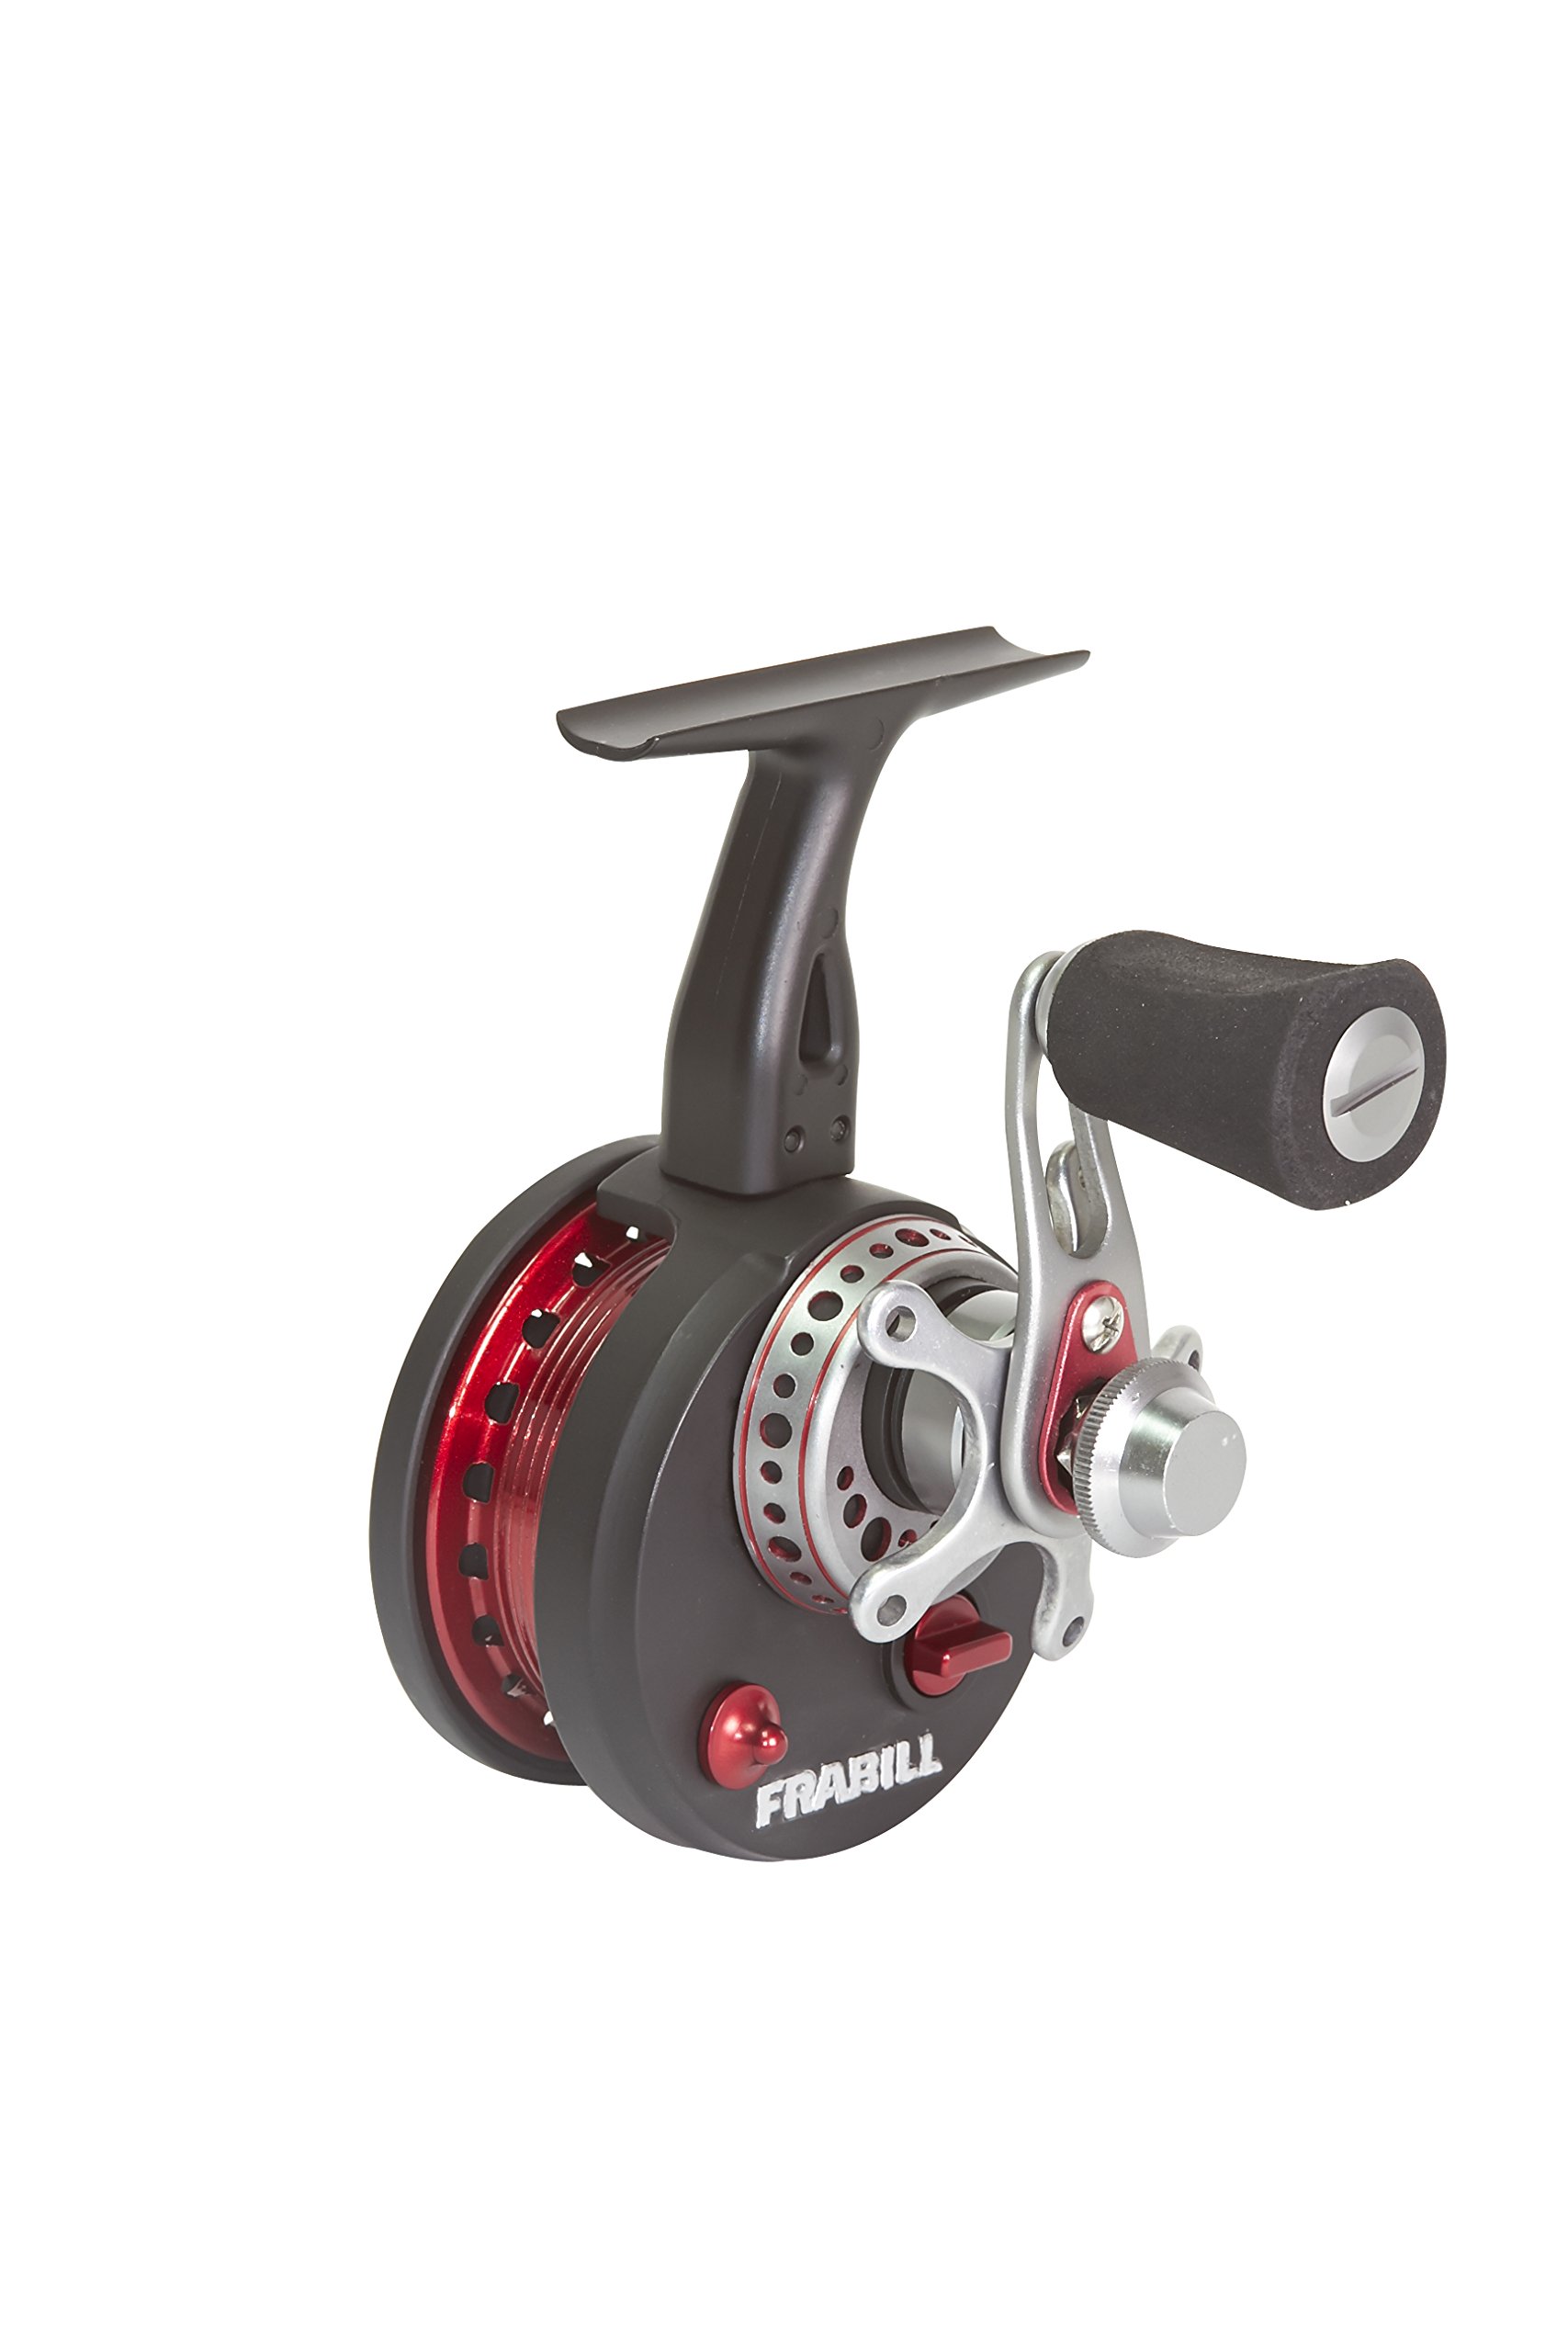 Frabill Straight Line 371 Ice Fishing Reel in Clamshell Pack並行輸入品